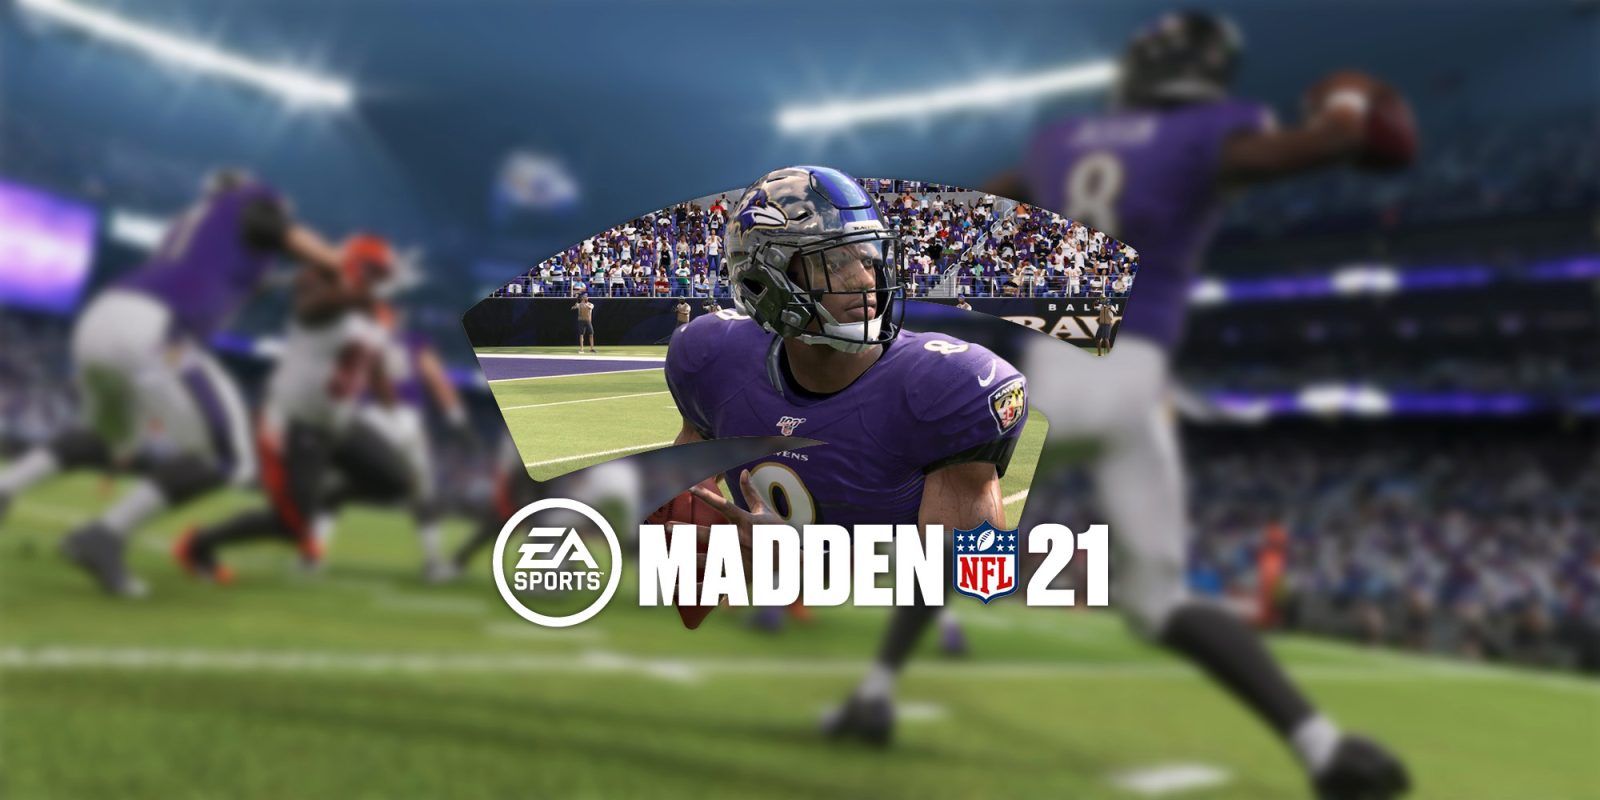 SUPERBOWL! Get stuck into your own virtual Super Bowl on Madden 21!